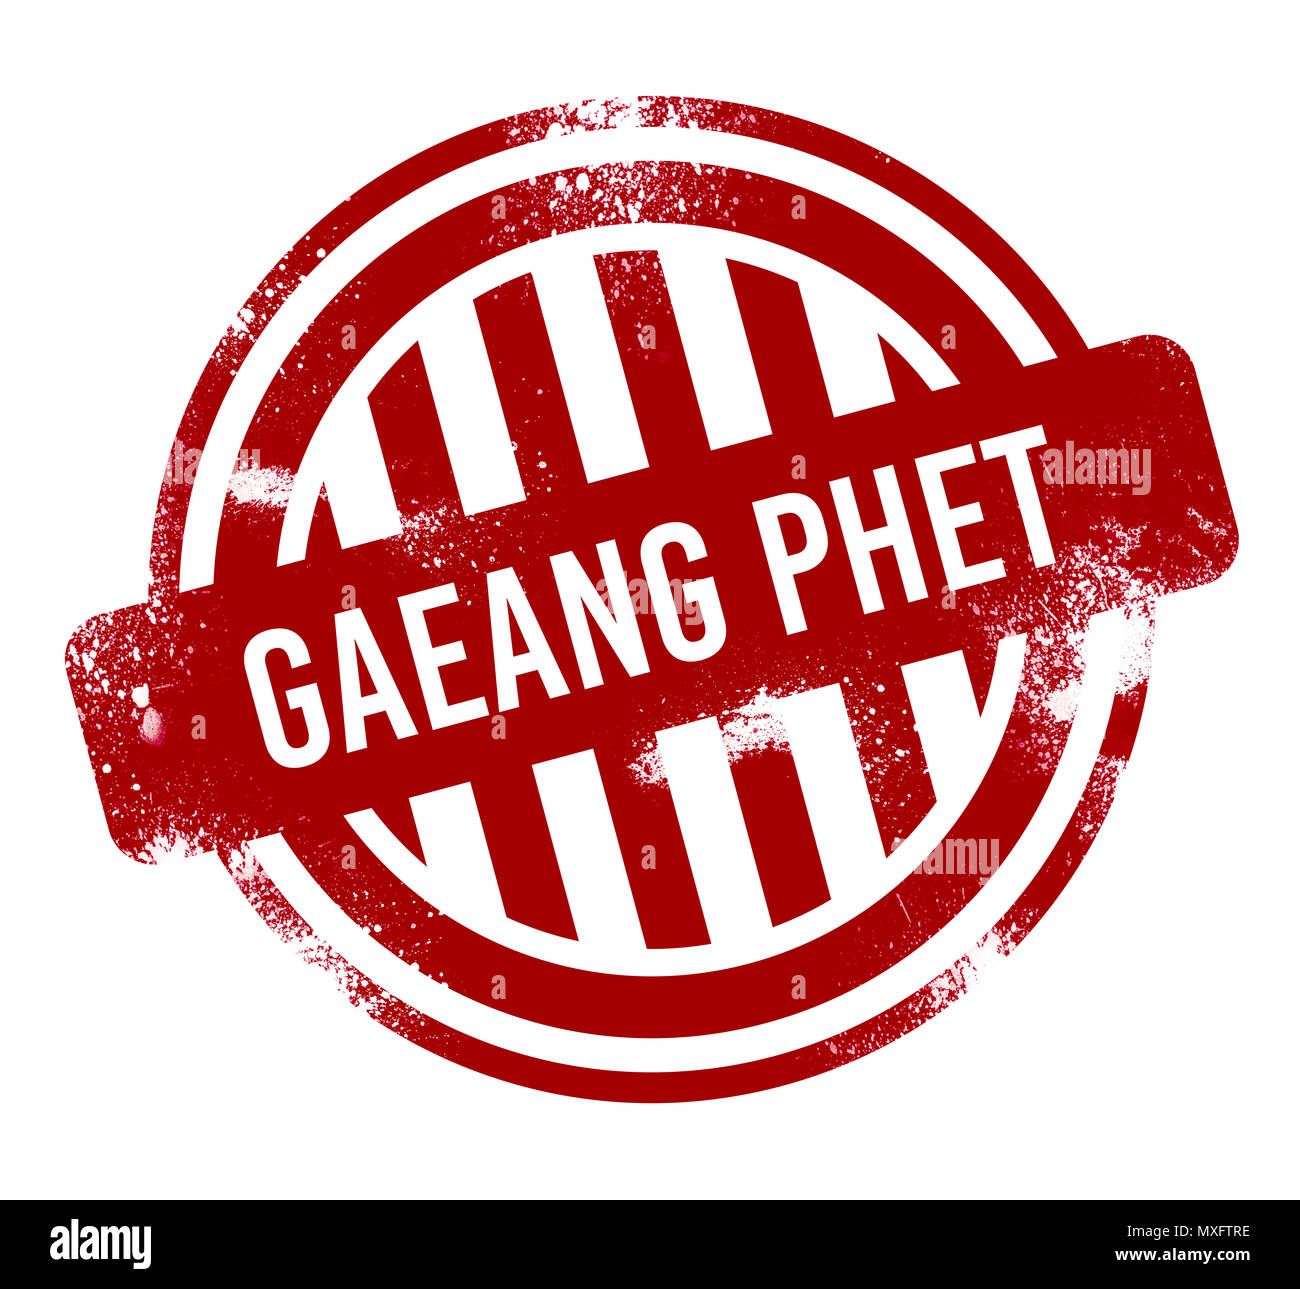 Gaeang Phet - Red grunge button, stamp Stock Photo